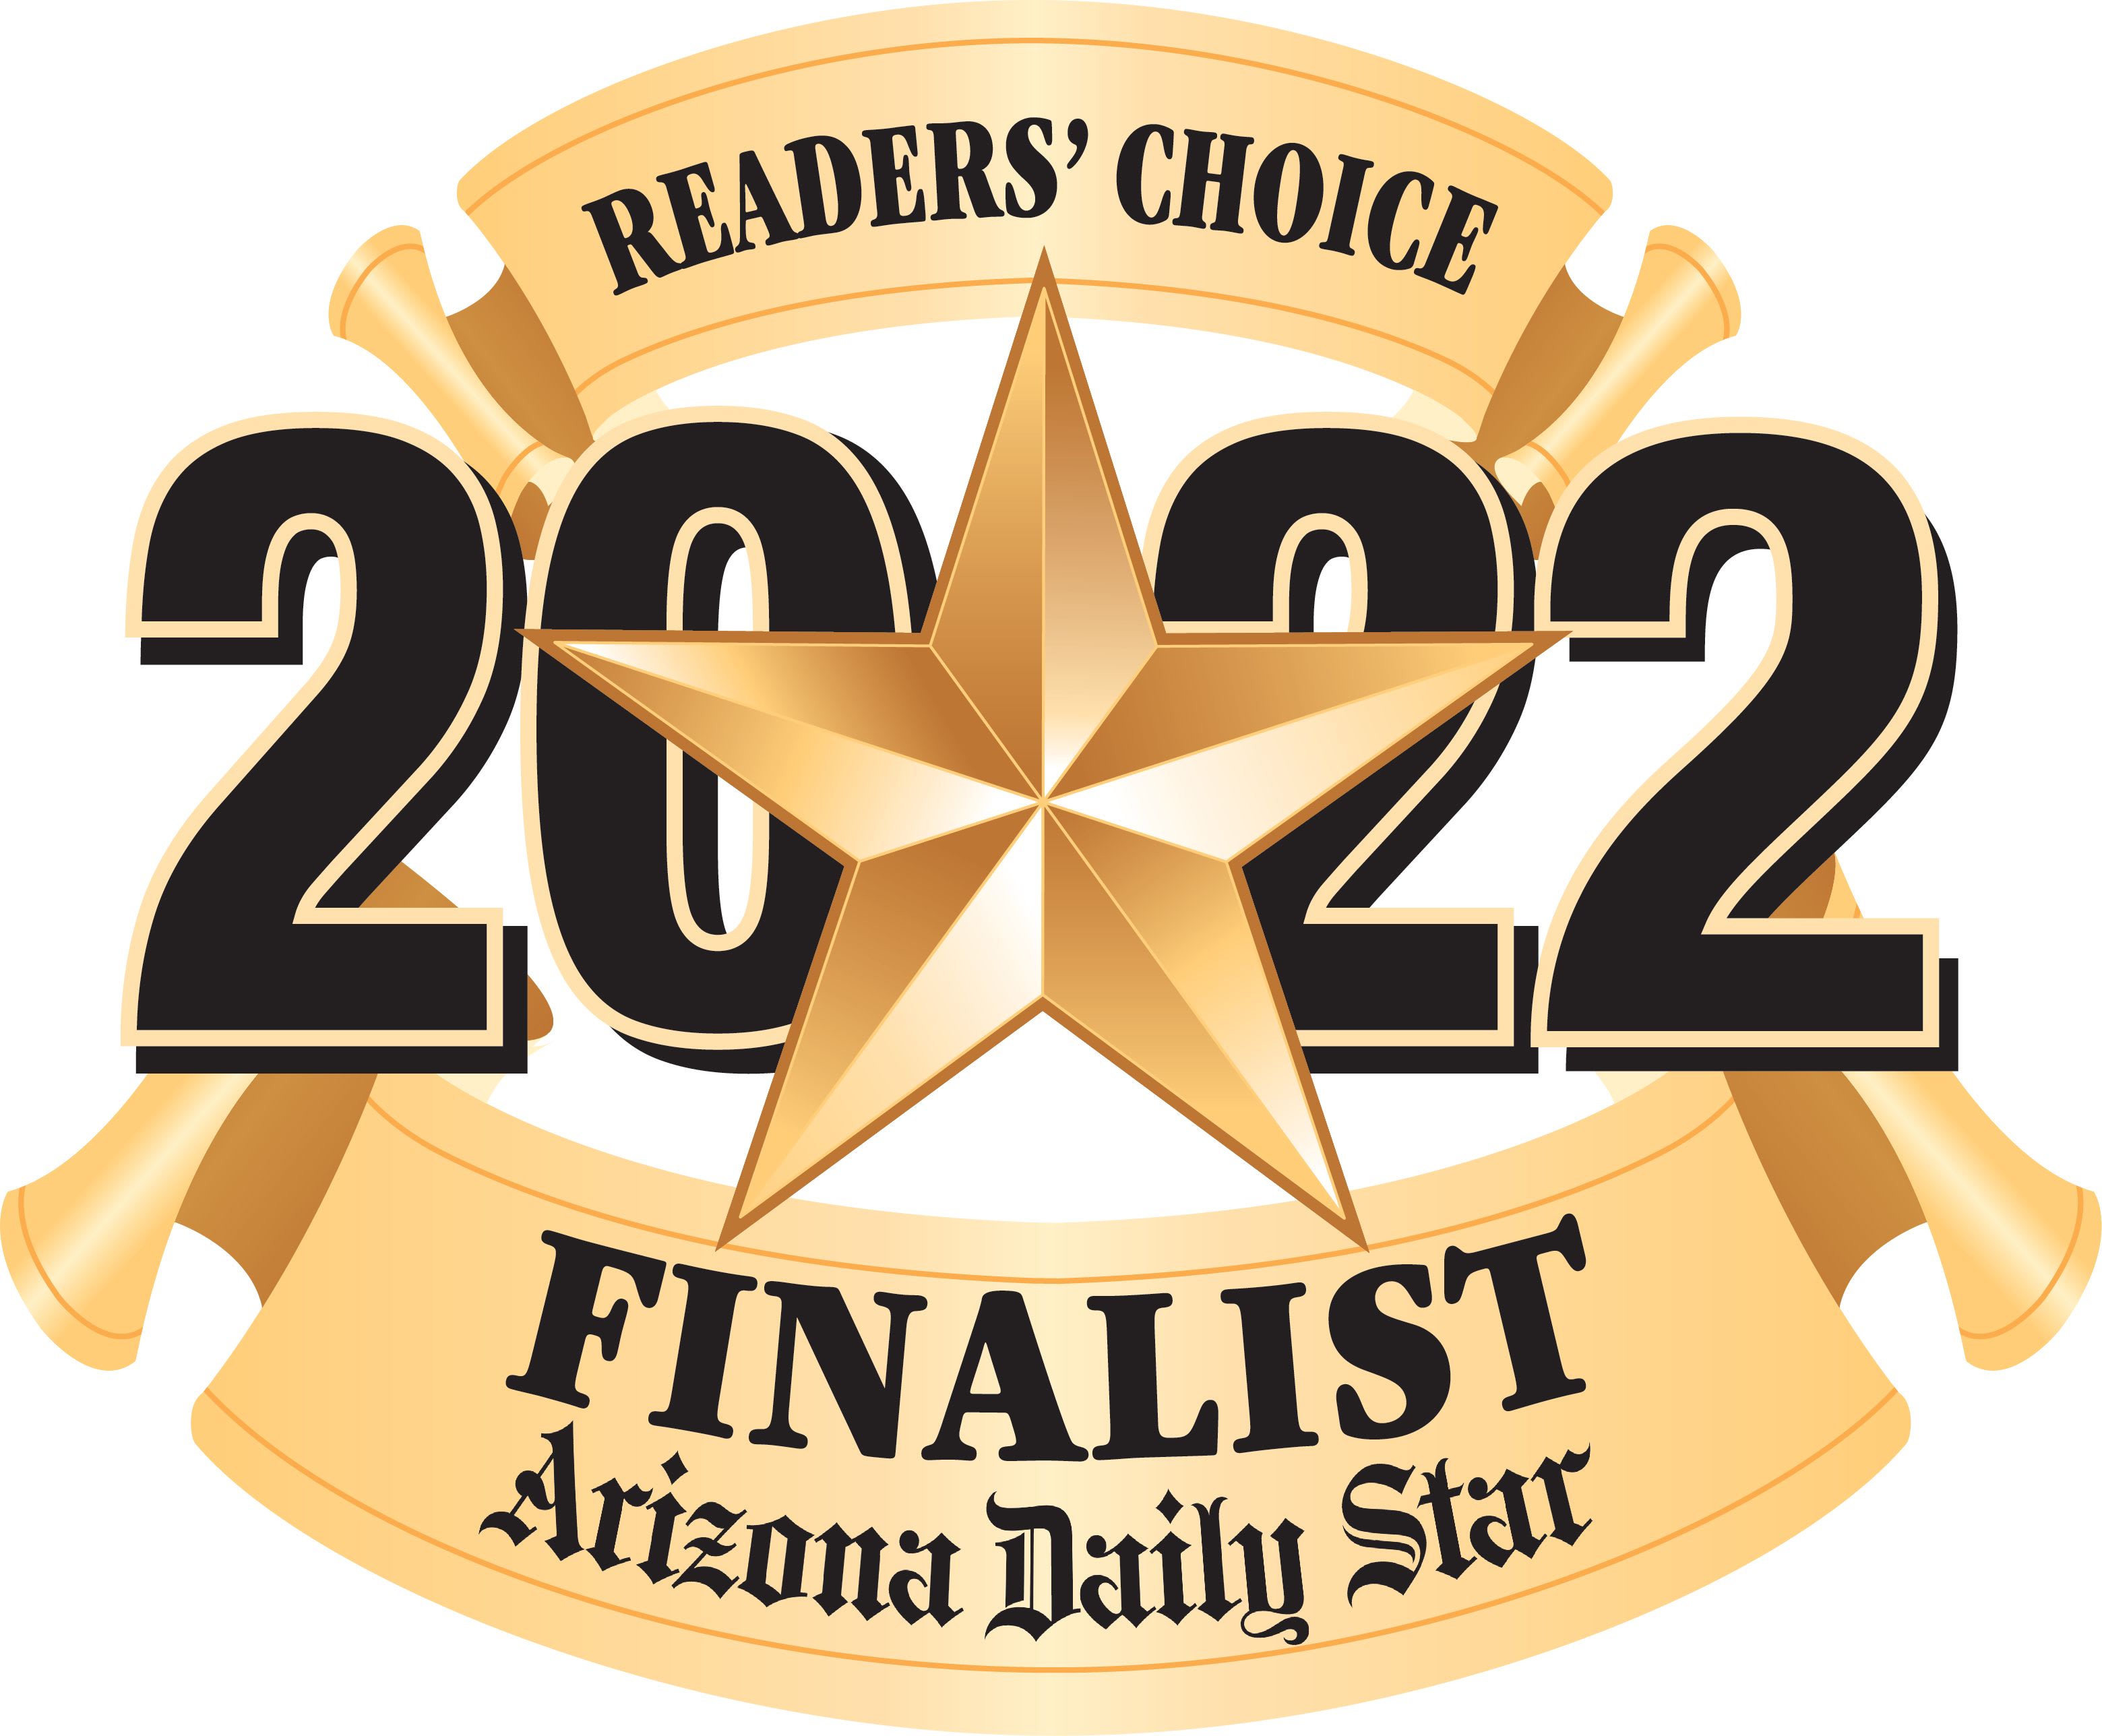 Readers Choice 2022 Finalist Award for Woodland Palms Memory Care